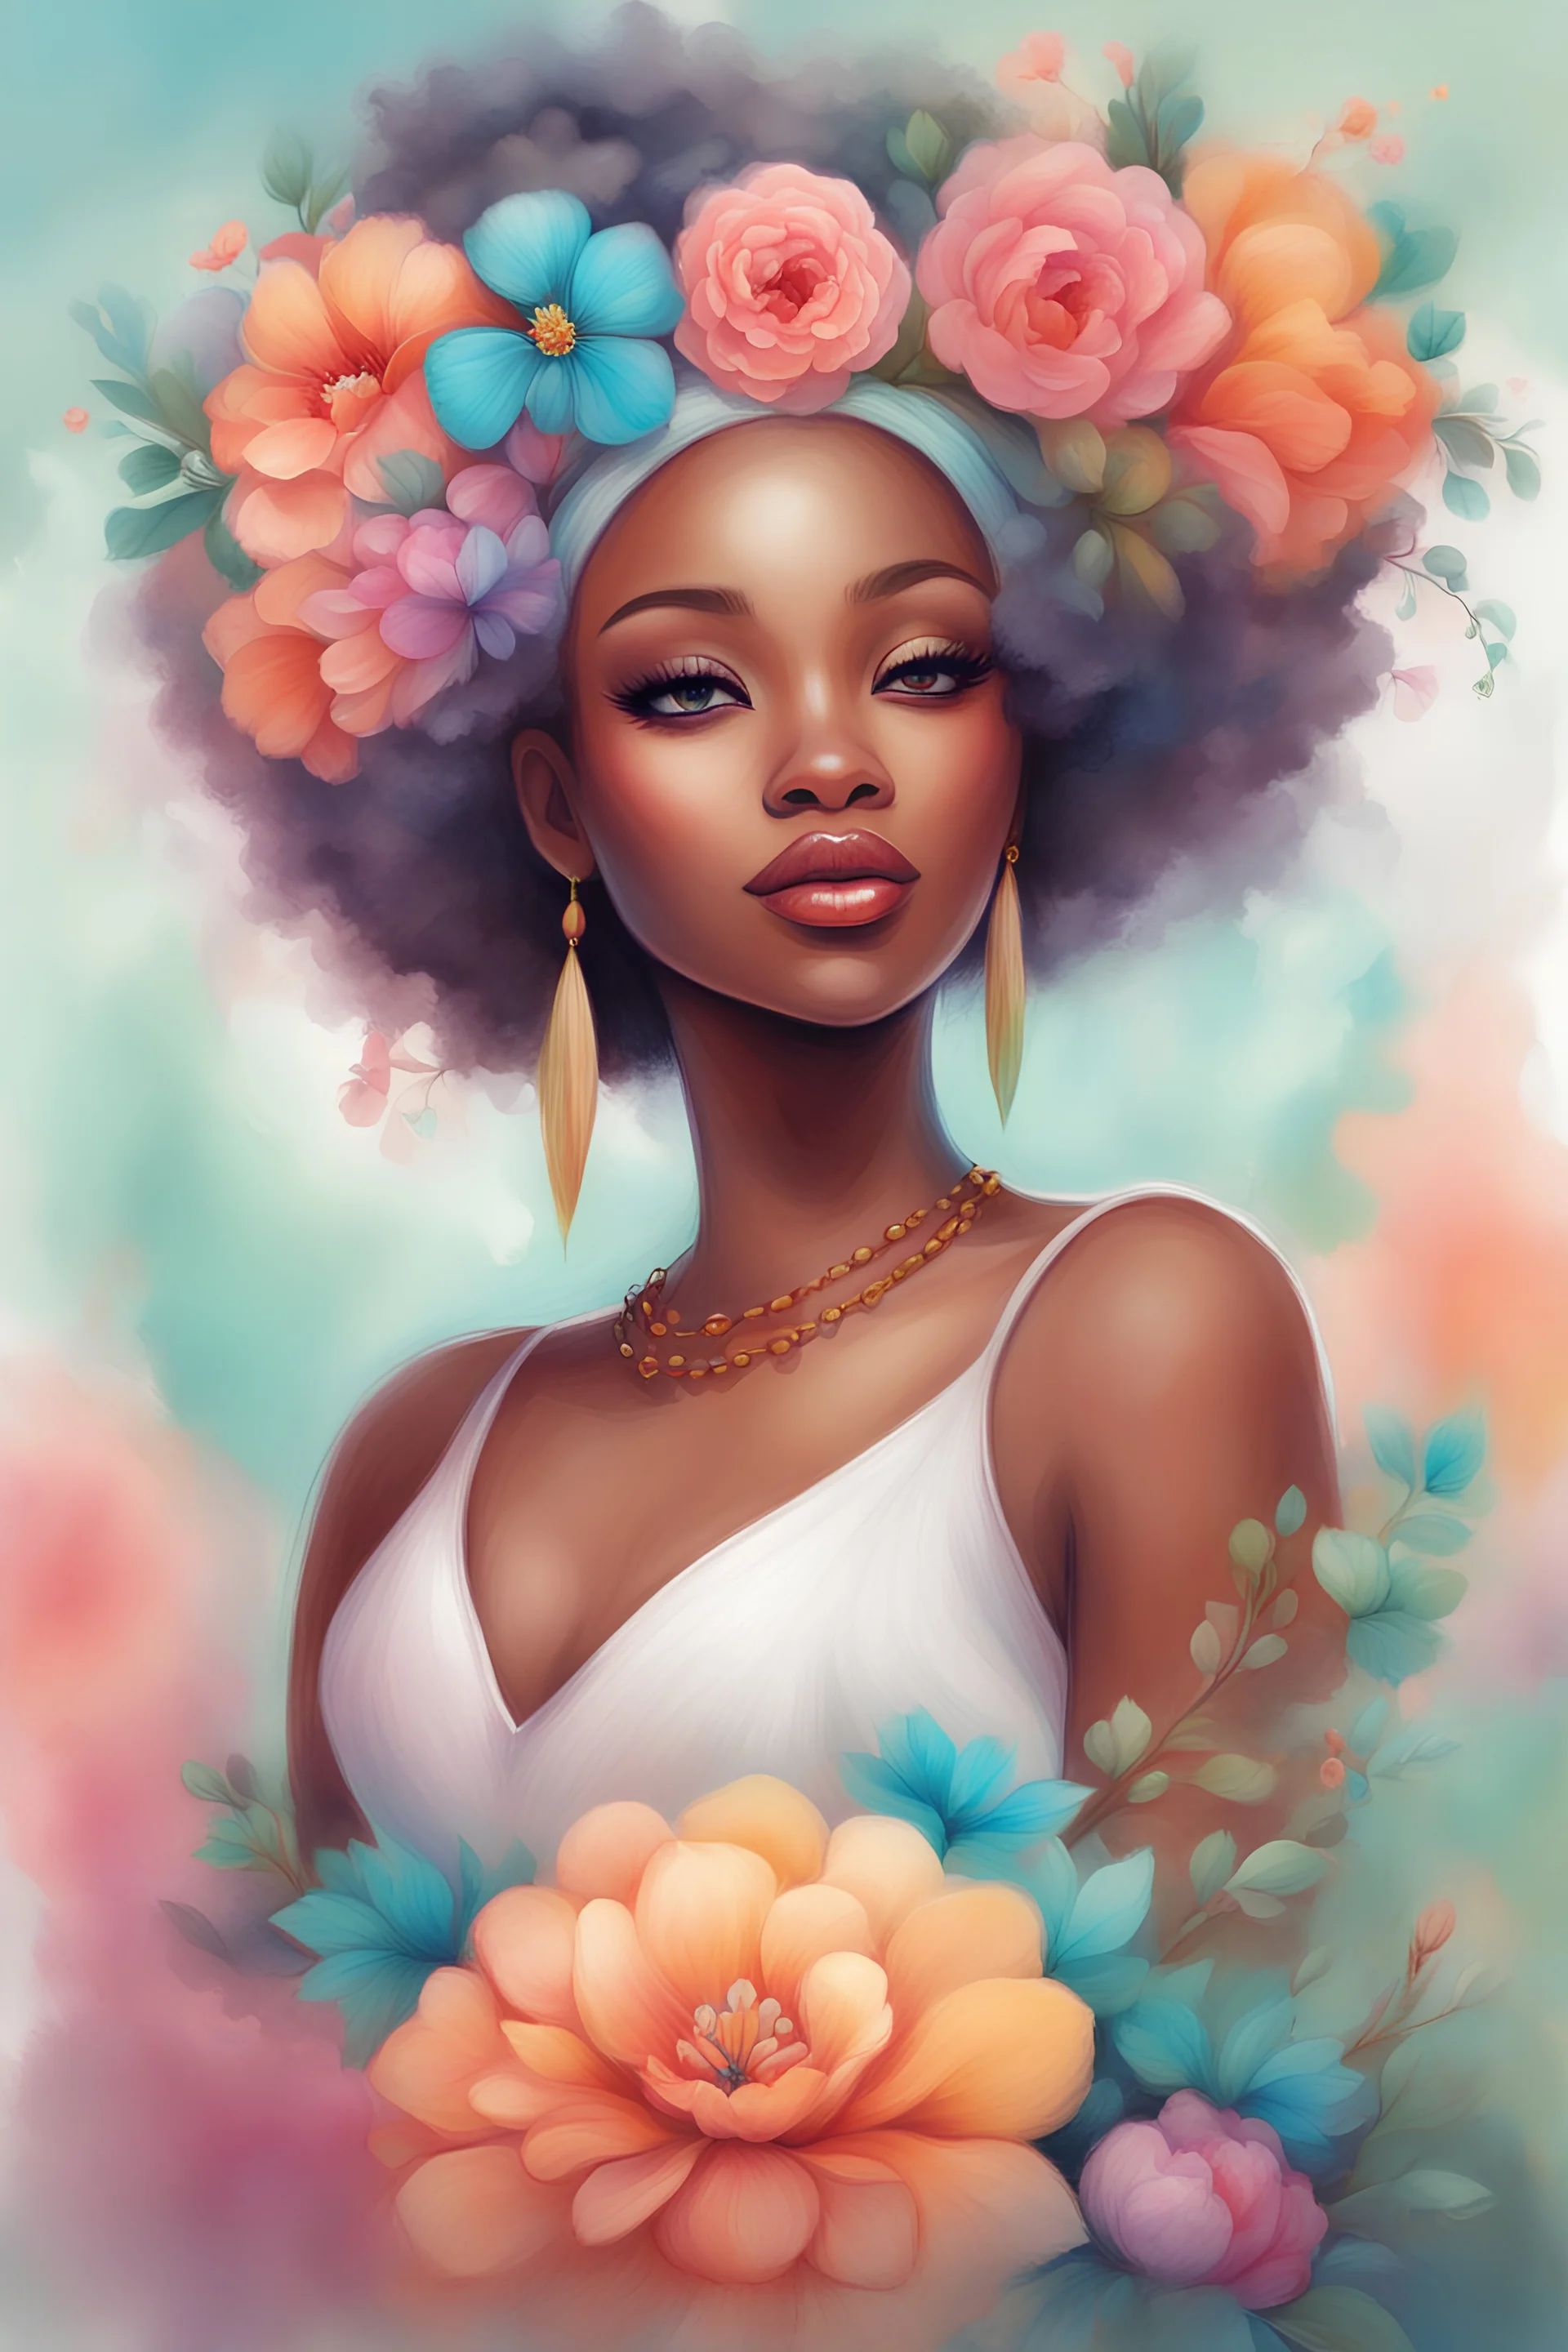 a painting of an African American woman with flowers in her hair, rossdraws pastel vibrant, beautiful fantasy art portrait, by Jeremiah Ketner, beautiful fantasy portrait, girl in flowers, woman in flowers, beautiful anime portrait, inspired by Anna Dittmann, colorful watercolor painting, watercolor detailed art, vibrant watercolor painting, exquisite digital illustration, by Anna Dittmann, stunning anime face portrait